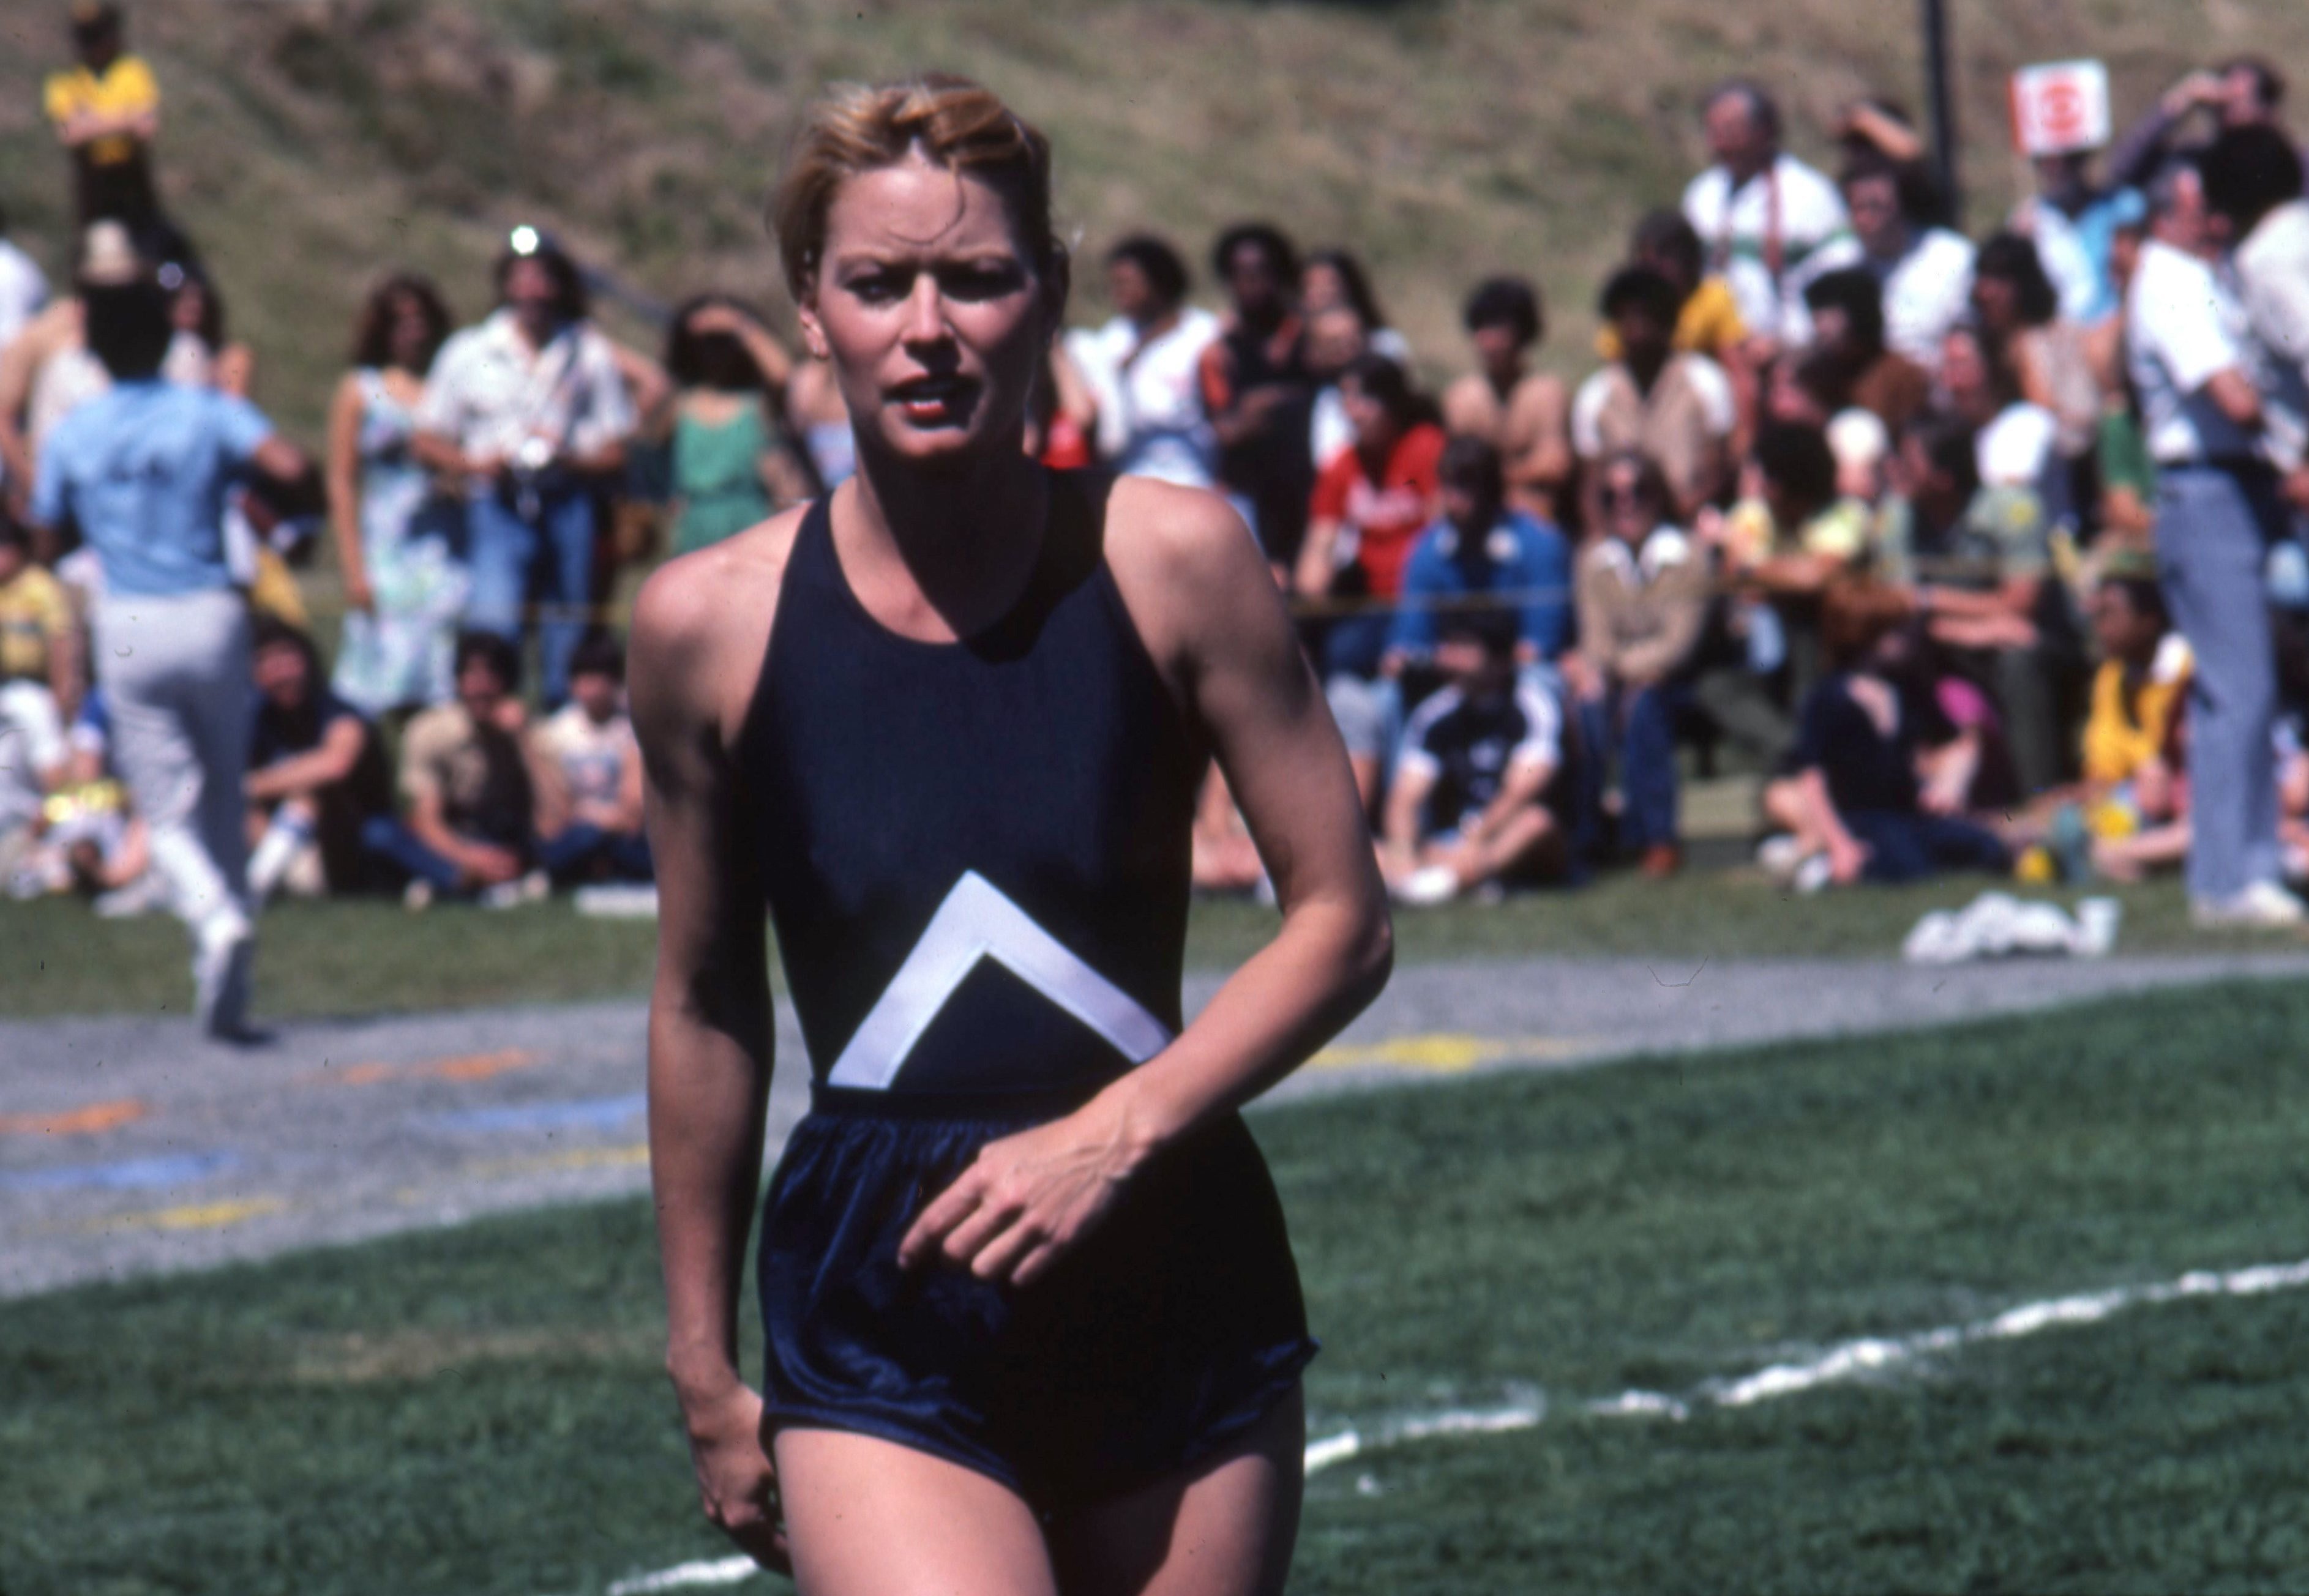 Randi Oakes on the set of "Battle of the Network Stars" Episode Ten in May 1981, in Los Angeles, California. | Source: Getty Images